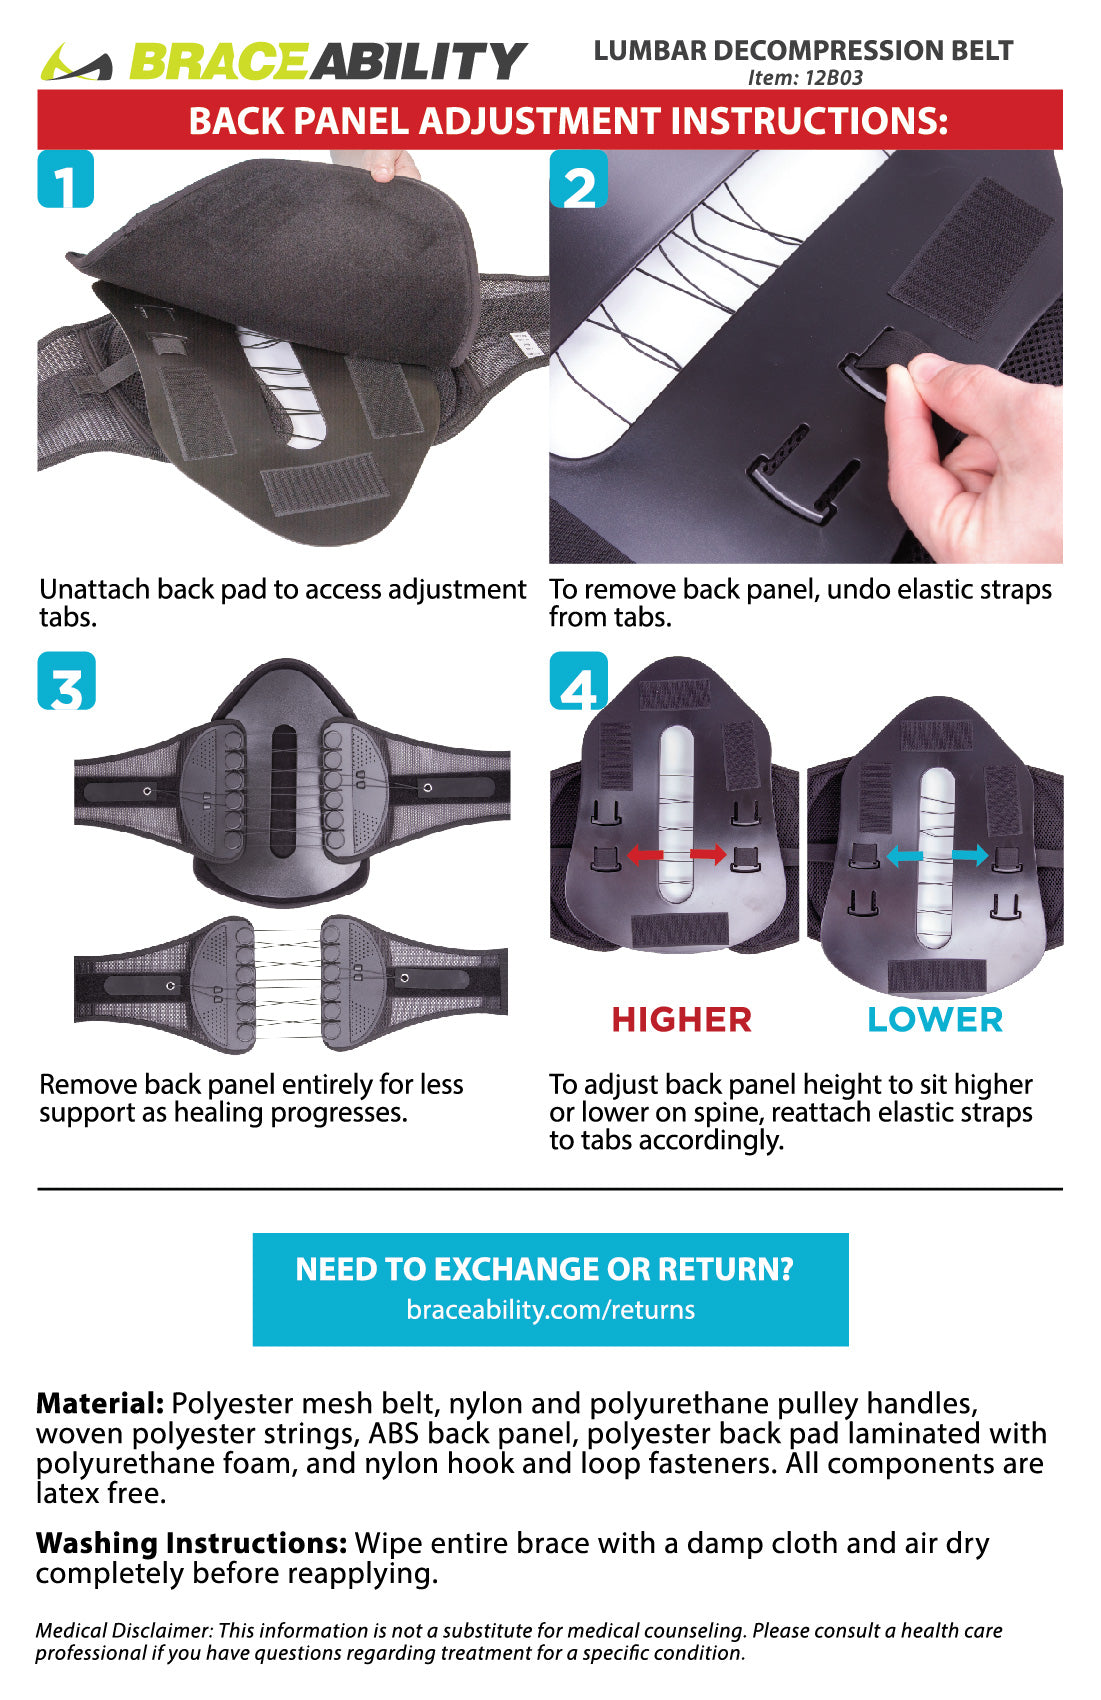 the adjustable lumbar brace is made of mesh and nylon